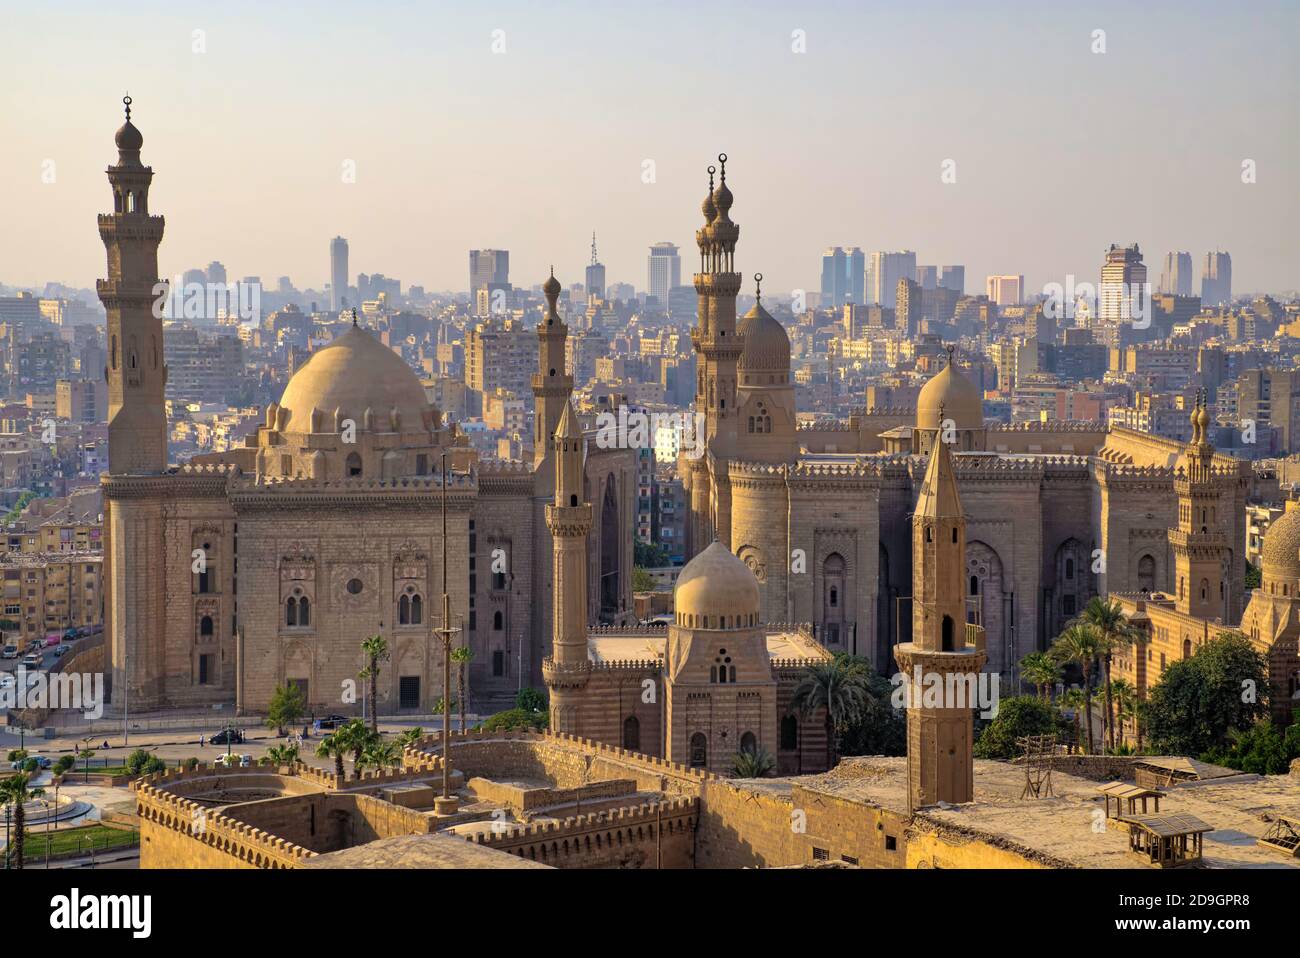 One of Cairo's most popular tourist attractions is the Citadel which houses a number of museums, ancient mosques and other sites, located on a spur of Stock Photo